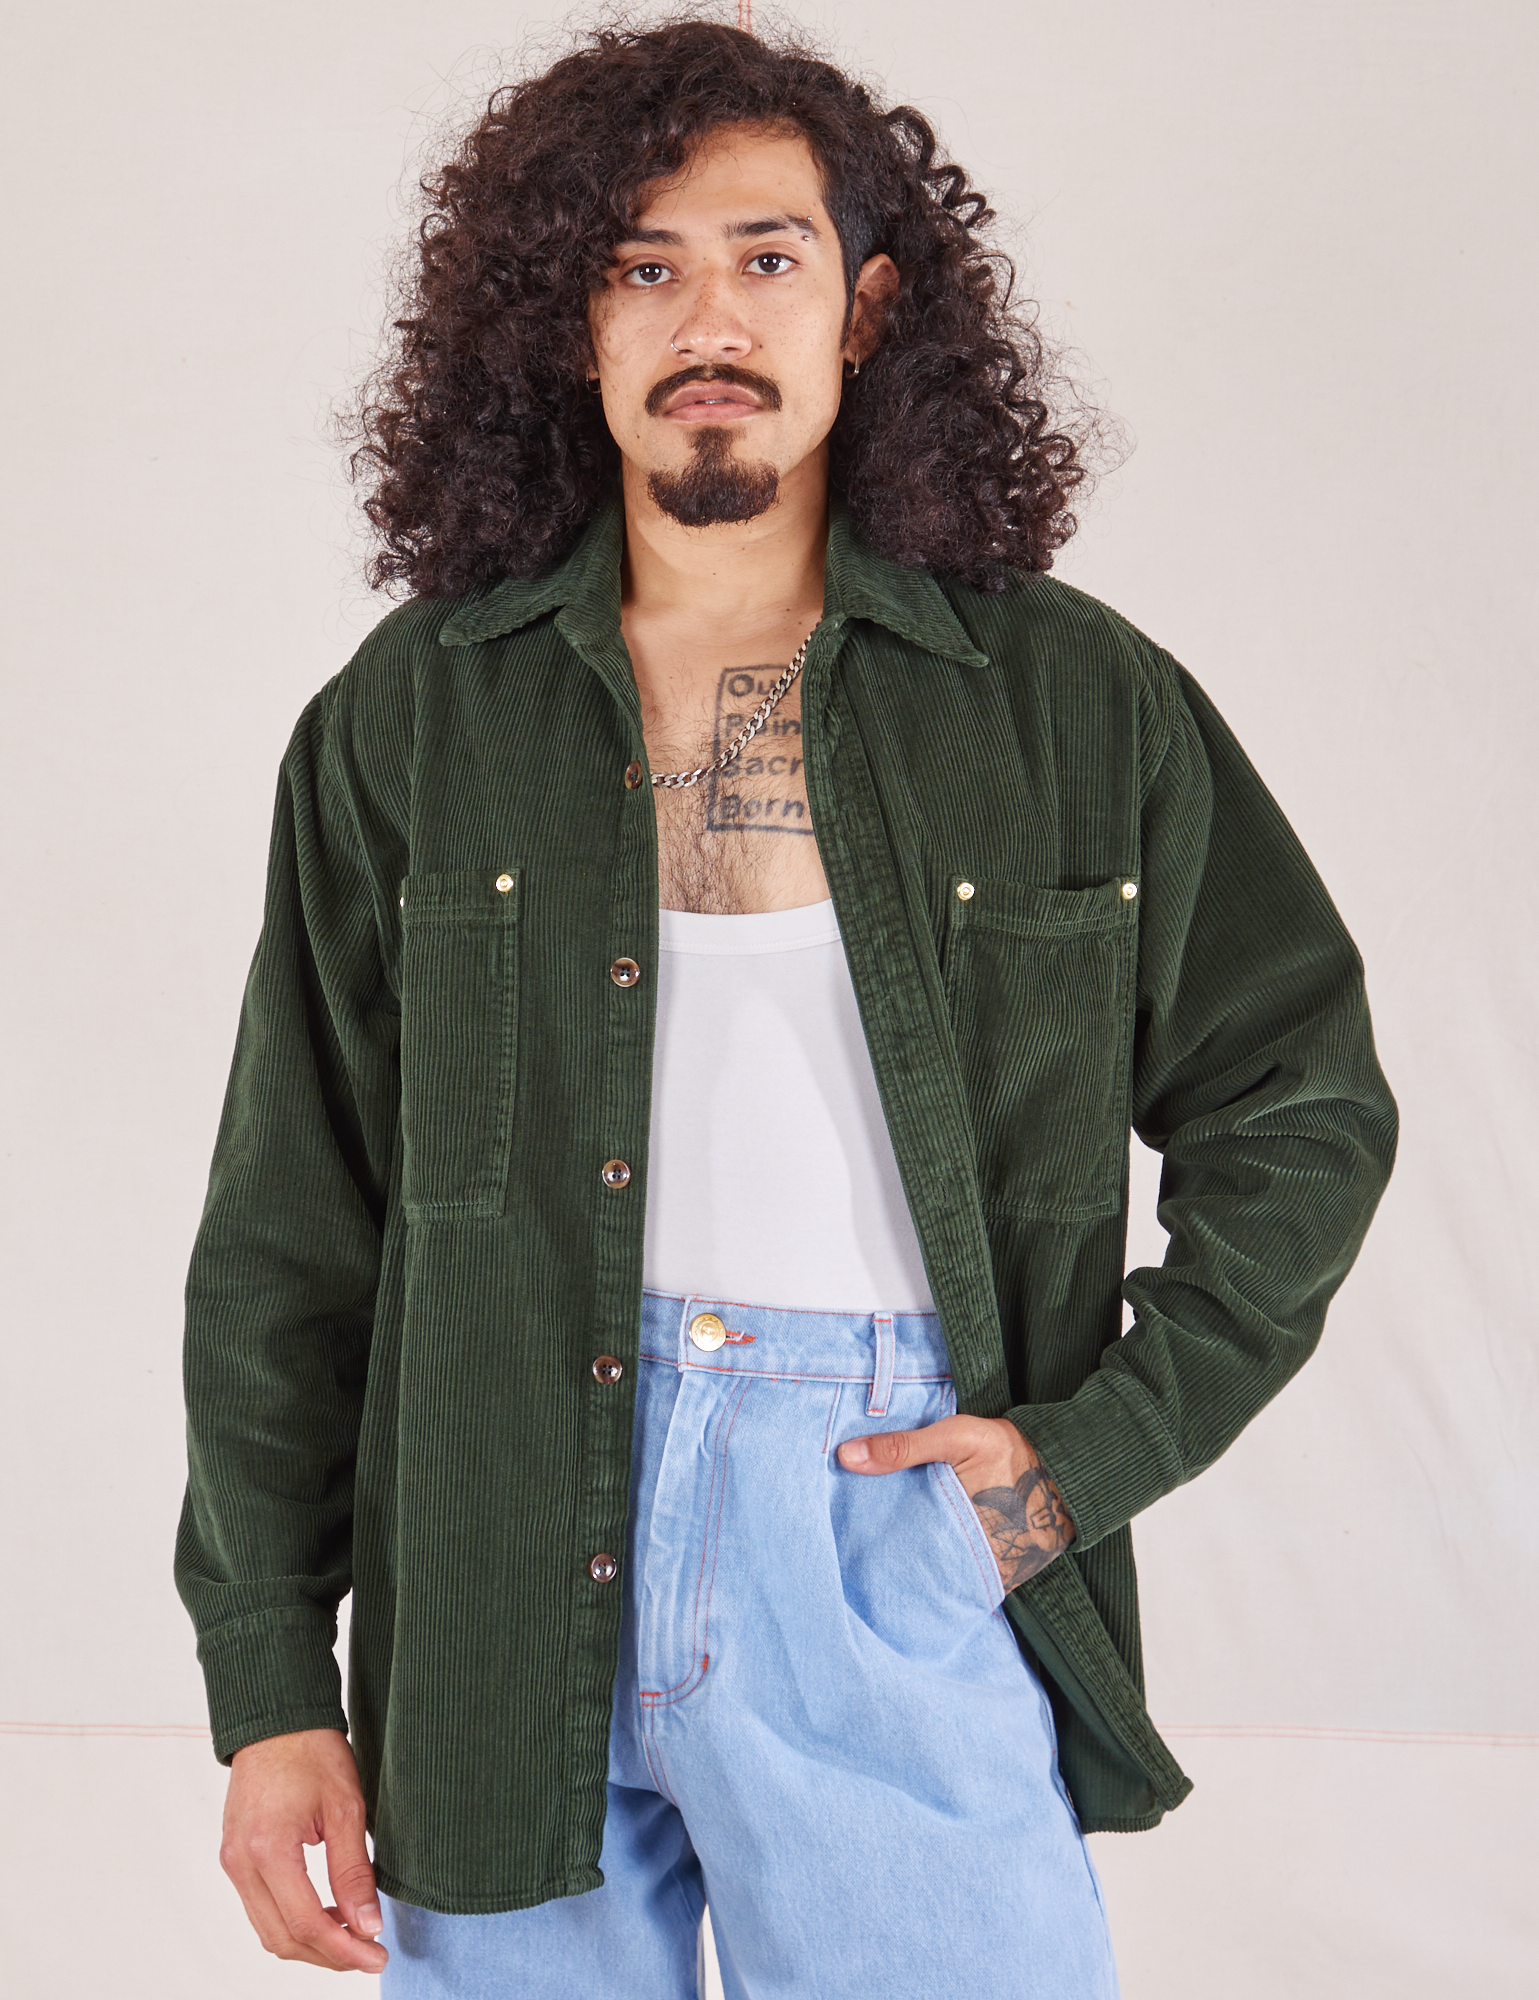 Jesse is wearing Corduroy Overshirt in Swamp Green with a vintage off-white Cropped Tank underneath paired with light wash Denim Trouser Jeans